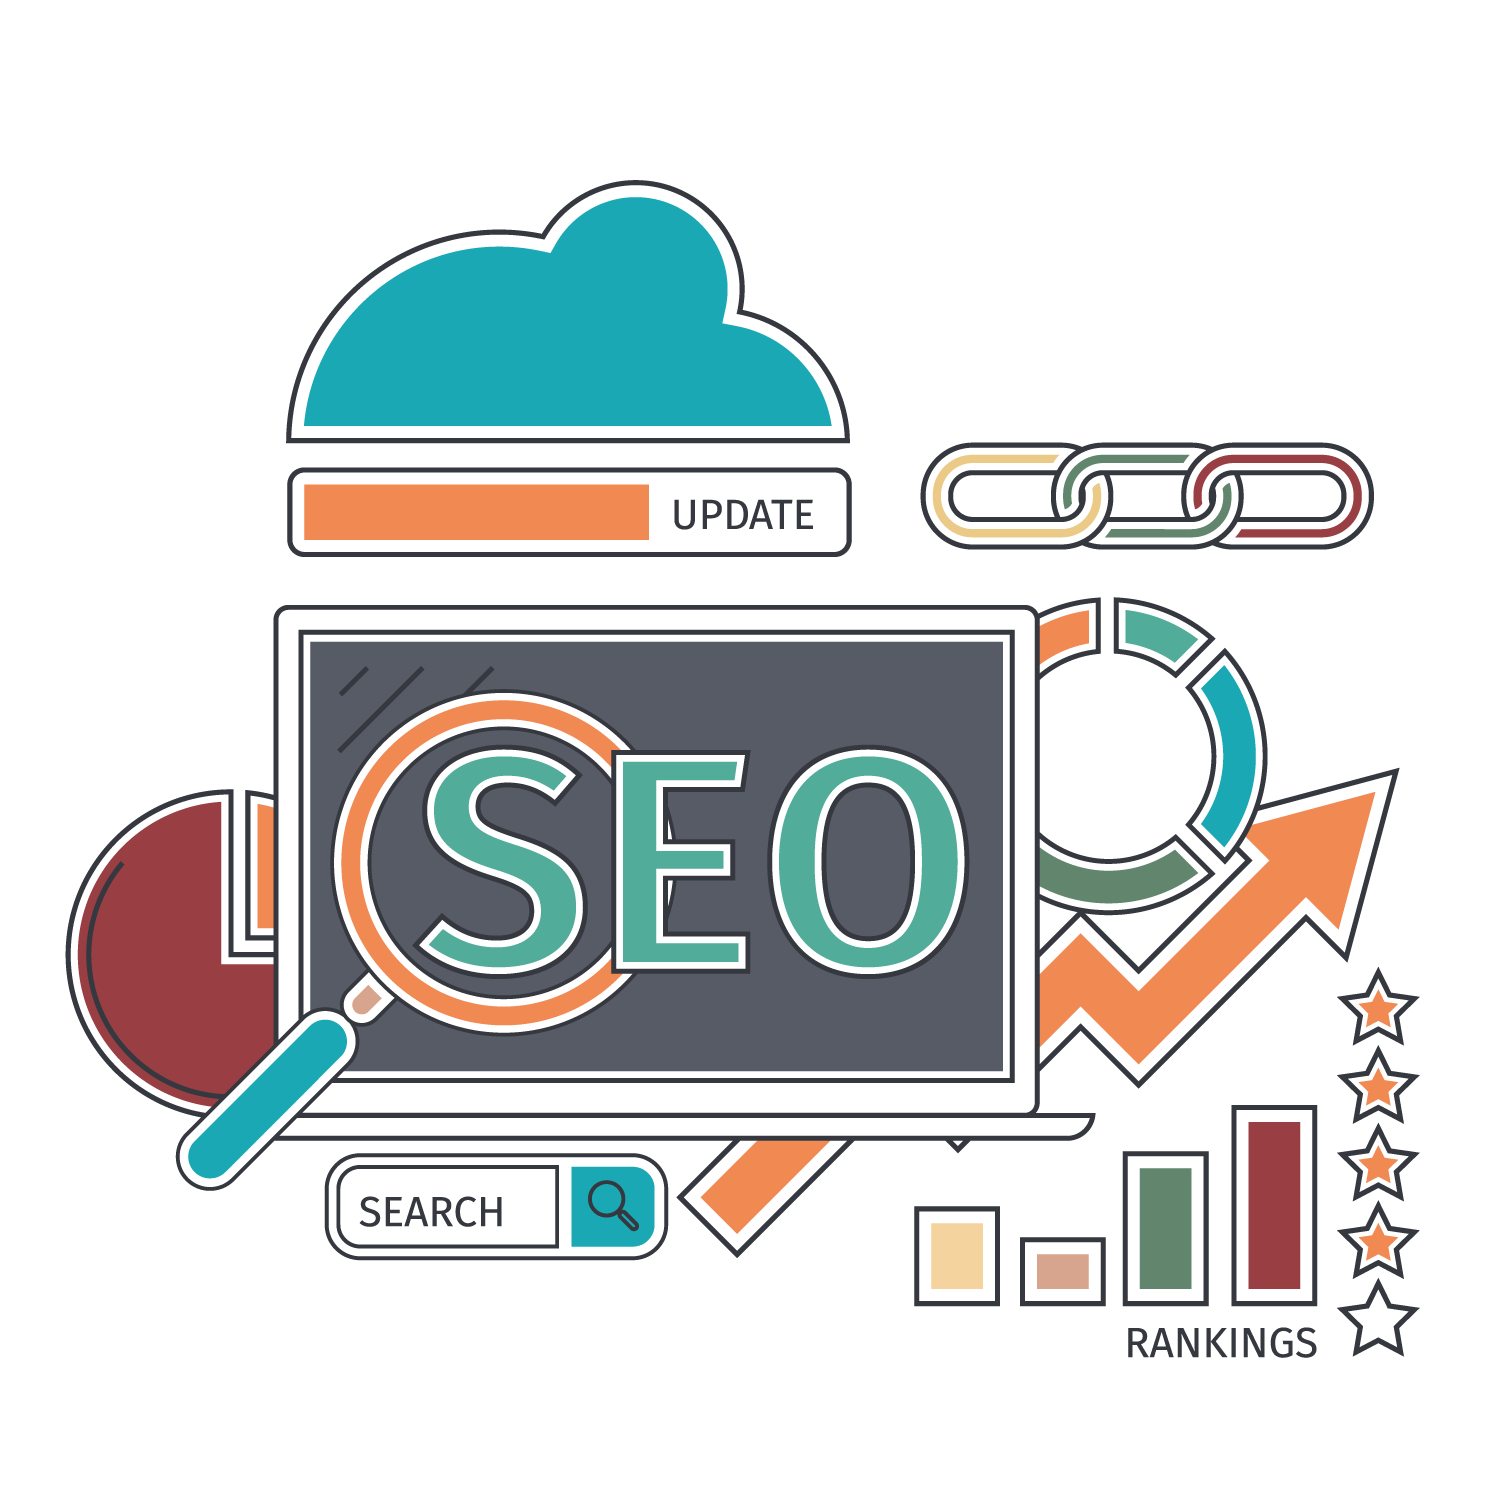 Search engine optimization stock illustration icon seo internet business icon picture ce1d1d12548a7b26bbb82d02d157420b